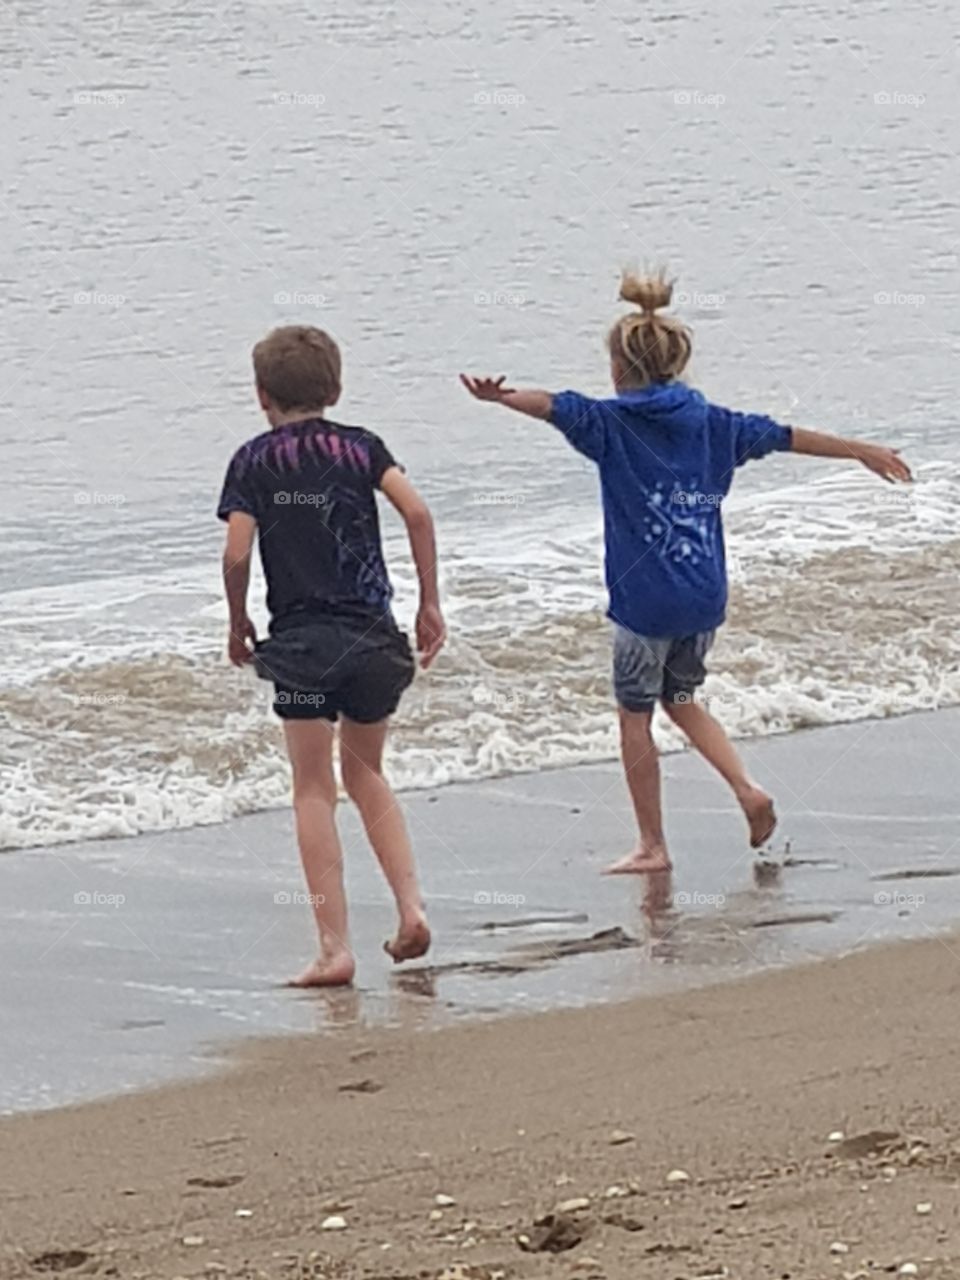 Here we go...two children running into the sea